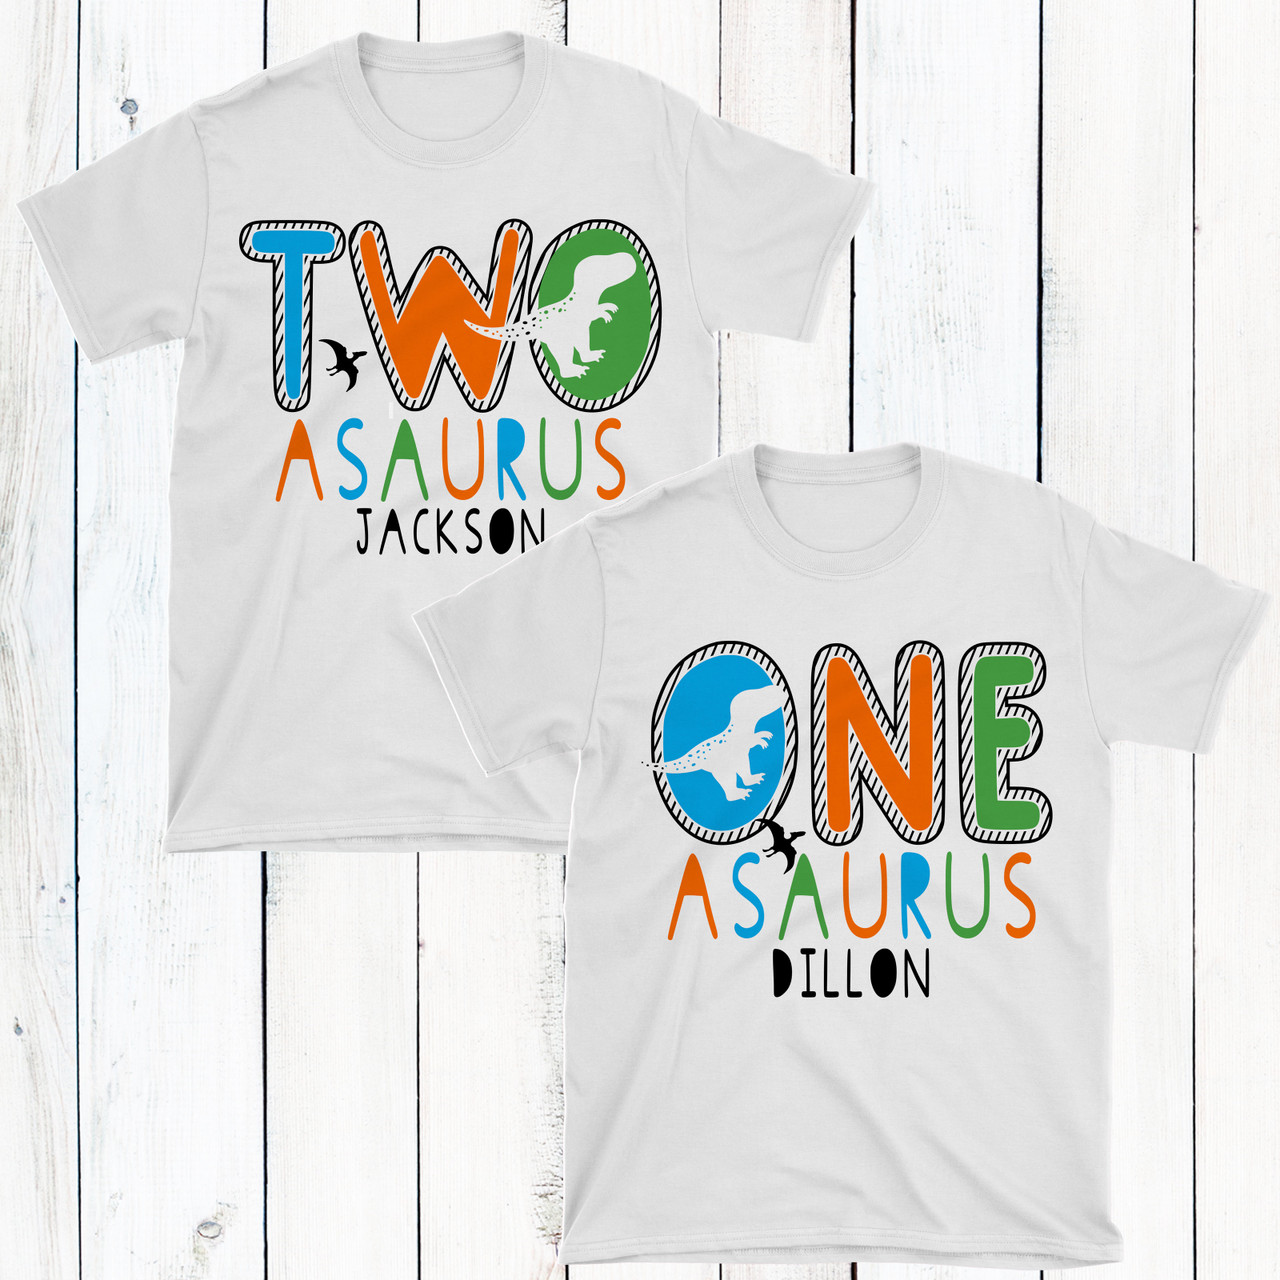 Girls Birthday Age T-Shirts Numbers Tops Animals Holiday Shirts Summer 1-6 Years 